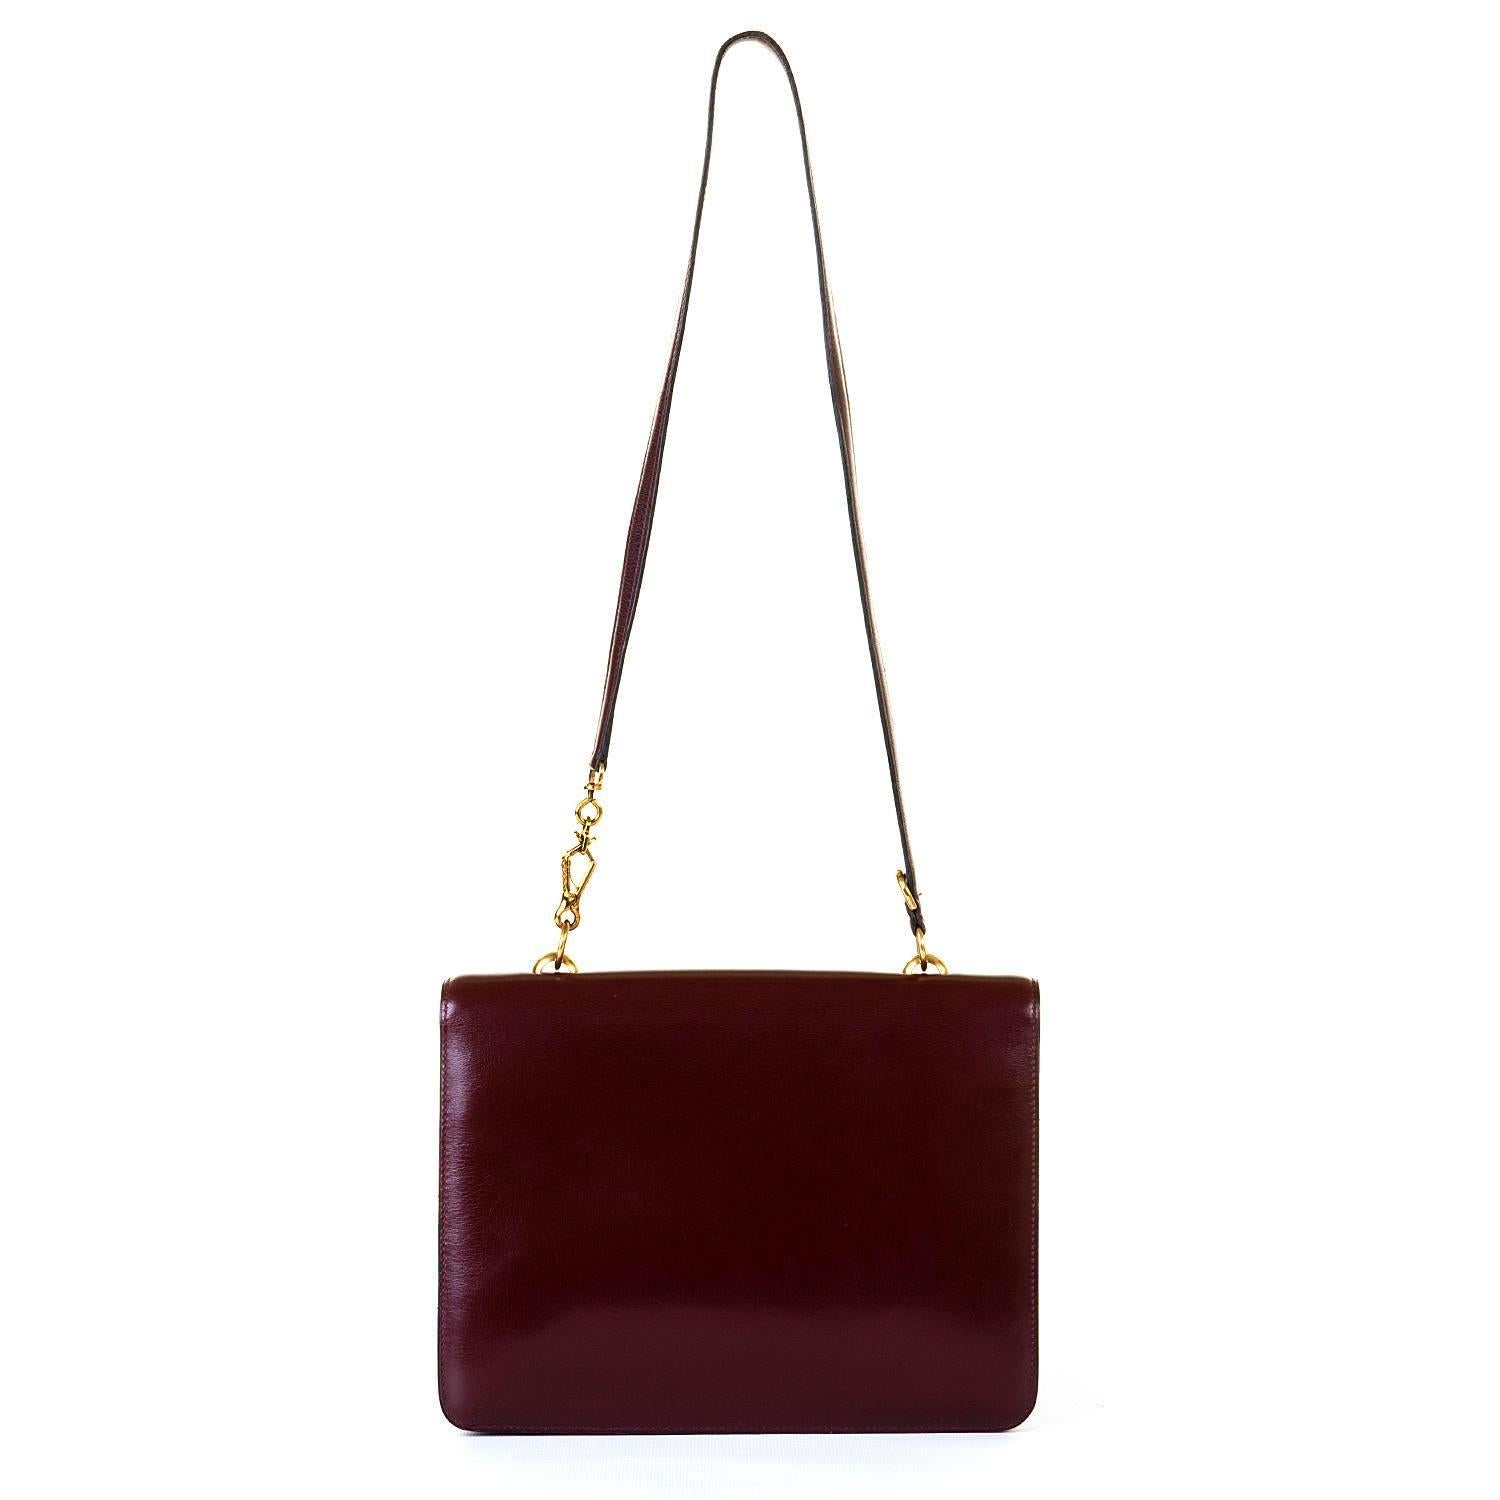 A stunning Vintage Hermes 'Sac Sandrine'  Shoulder bag, in Burgundy Box Leather with Goldtone Hardware. With it's featured 'stirrup' clasp, the bag, made in circa 1970, is in pristine, 'little-used' condition. Hermes designed this bag in homage to